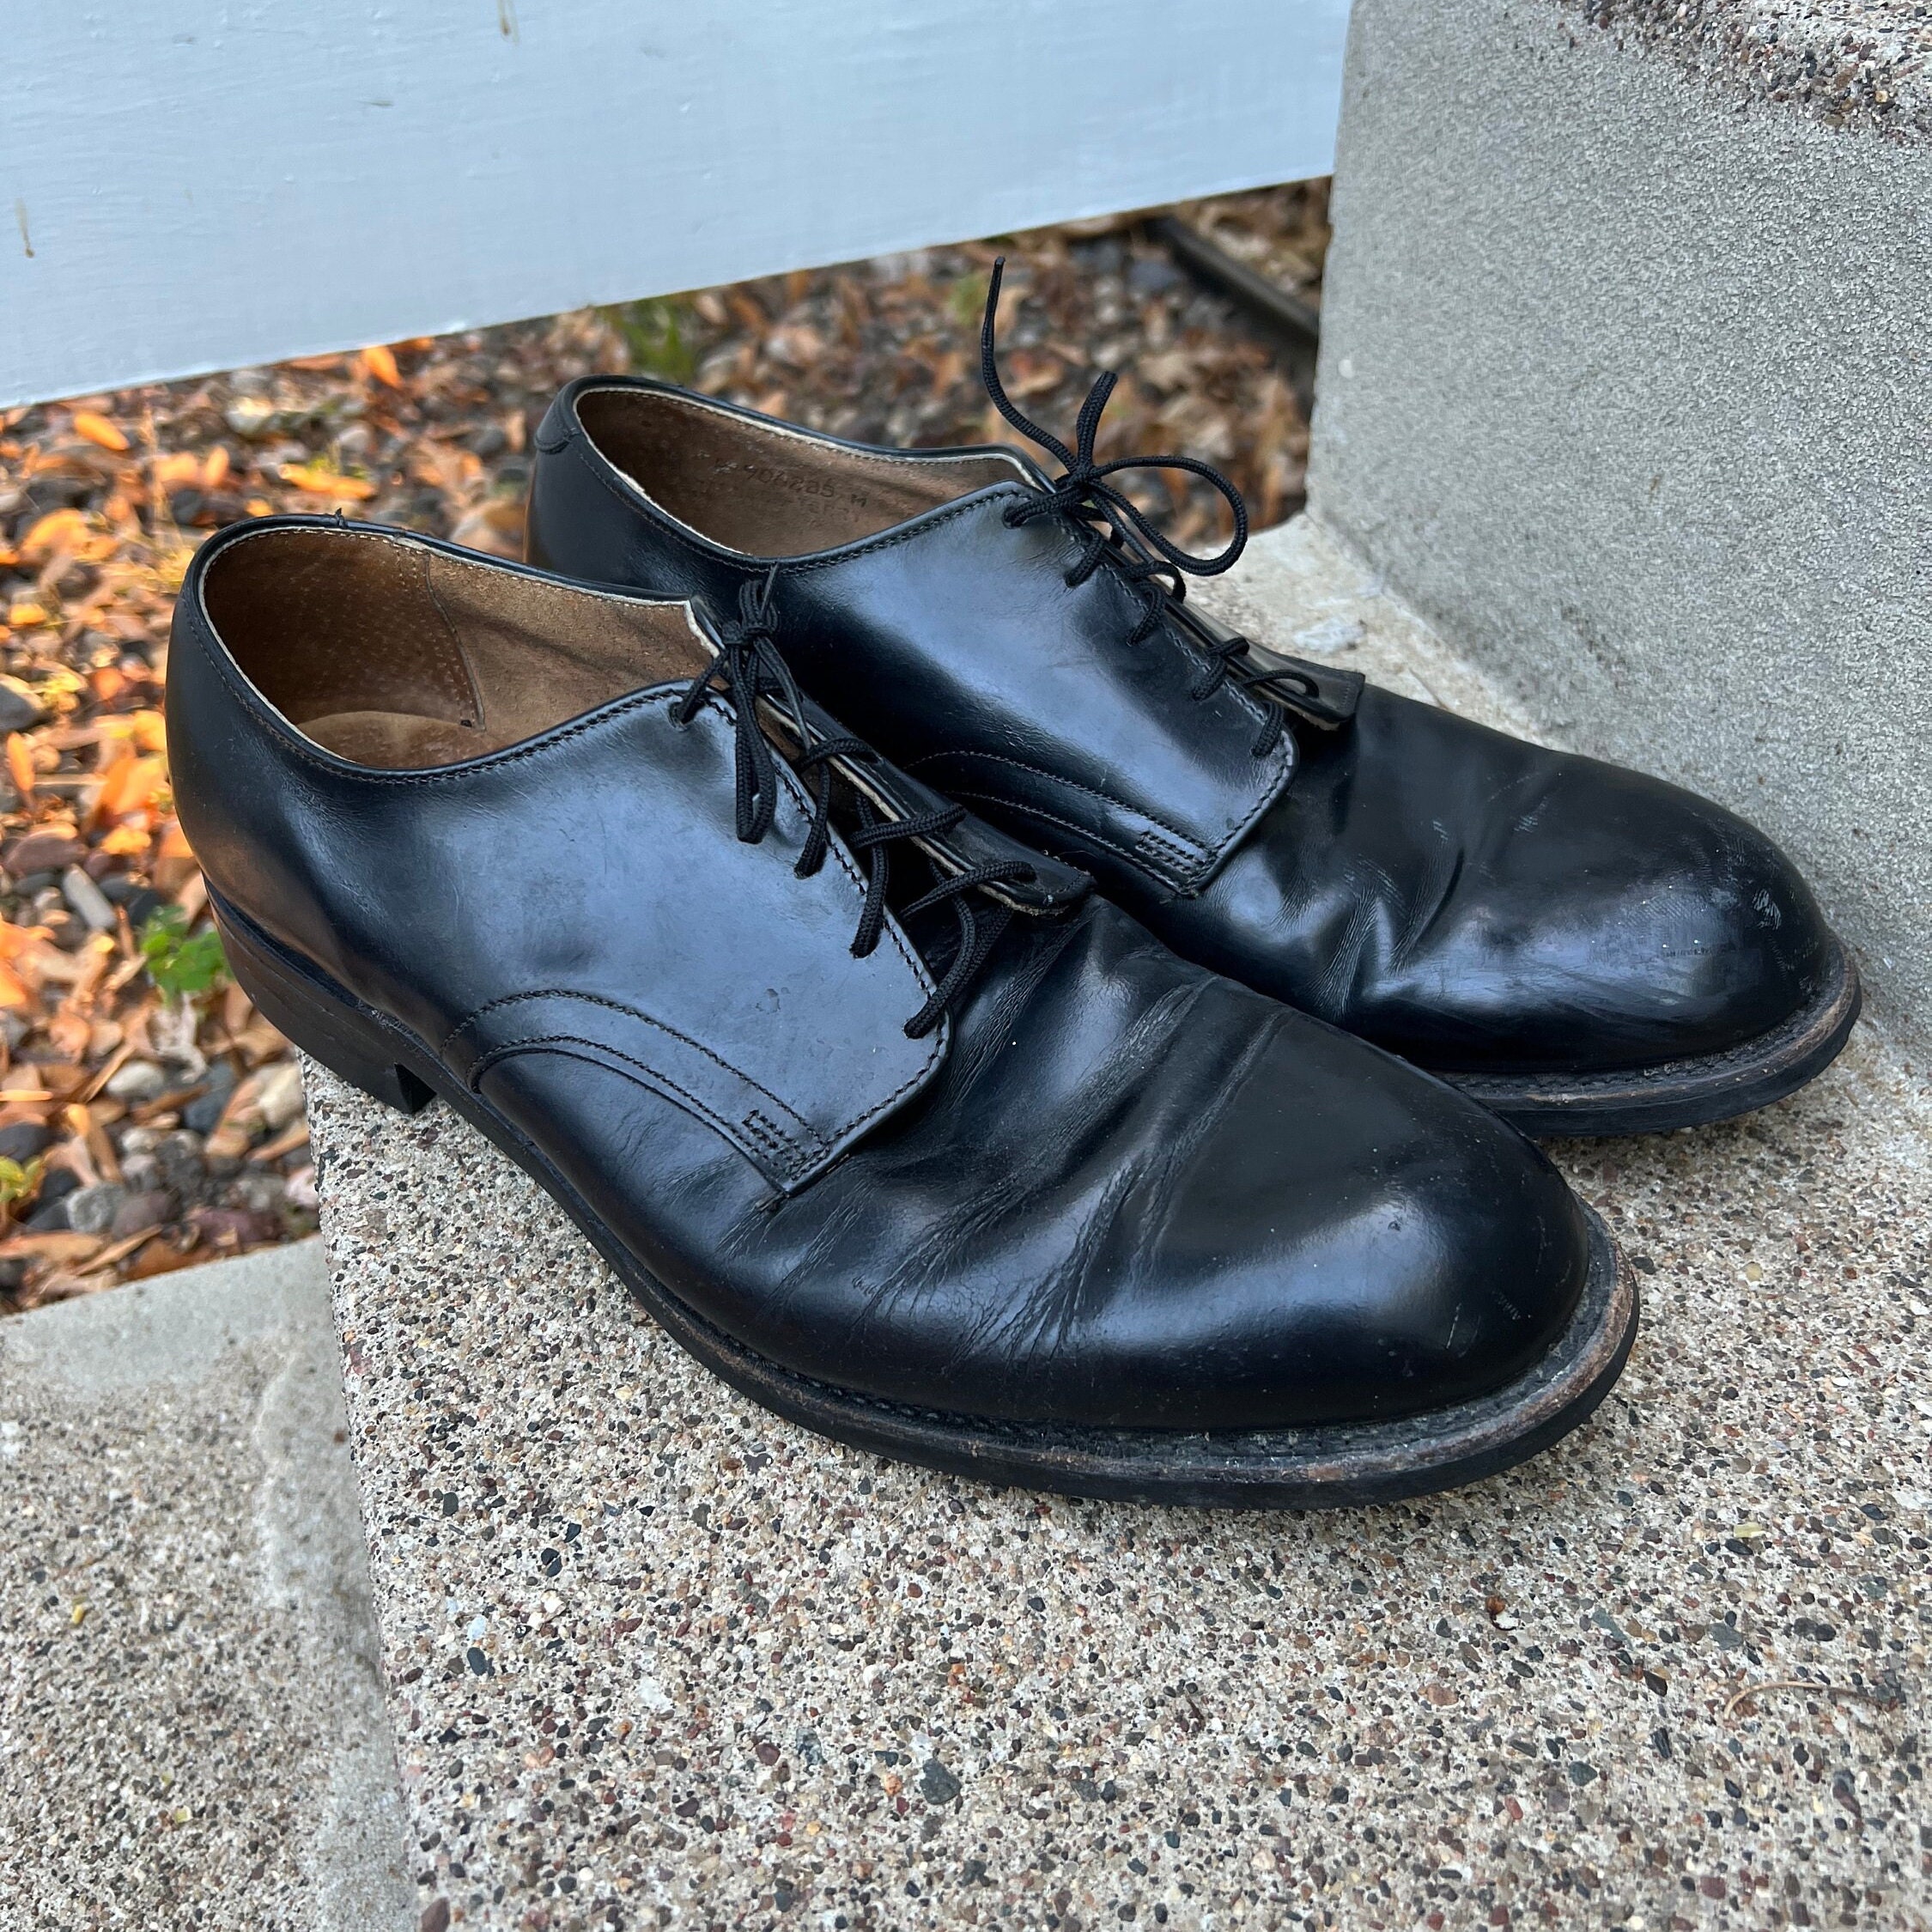 1960s Oxford Shoes - Etsy